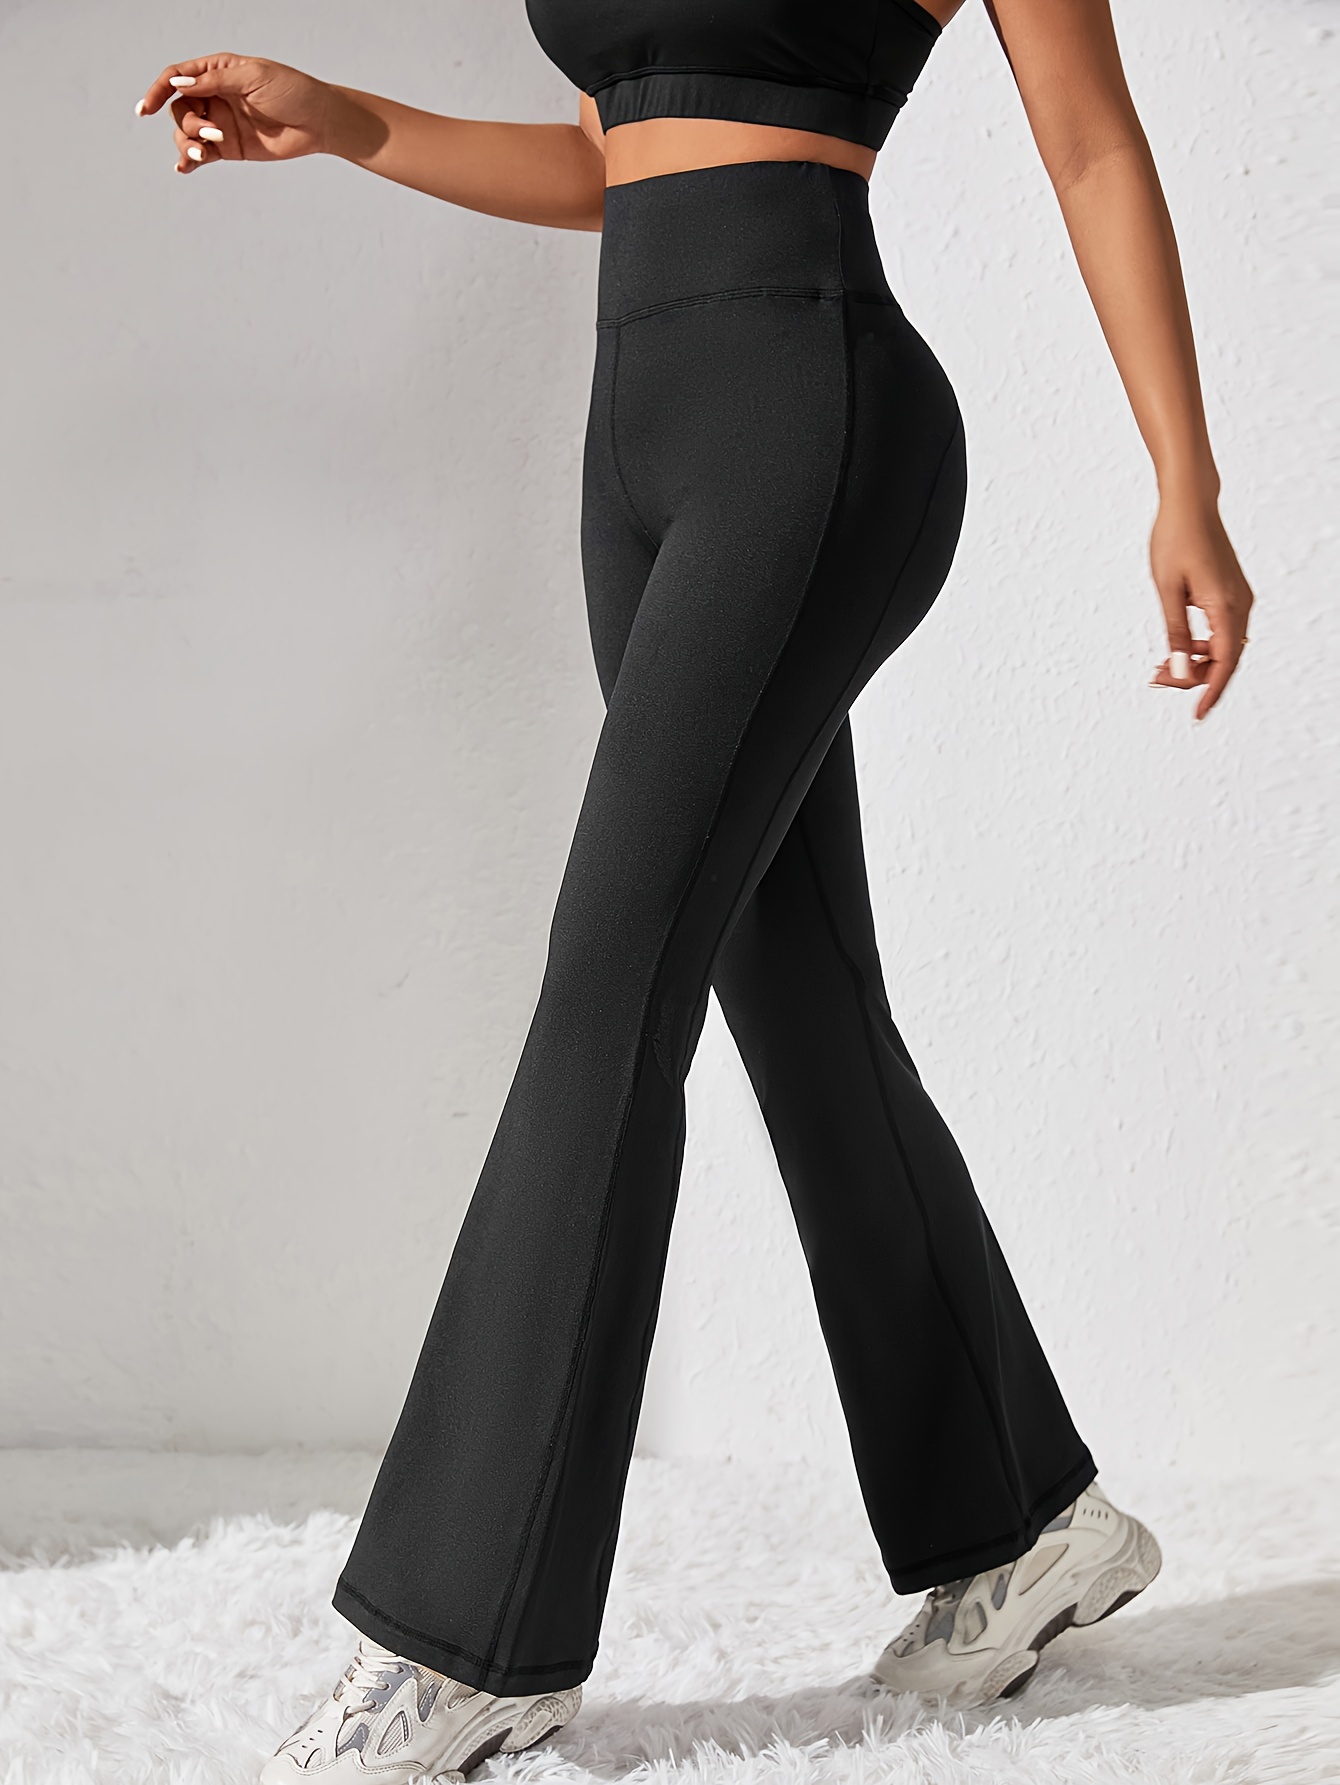 Petite Women Pants Bell Bottom - Free Shipping For New Users